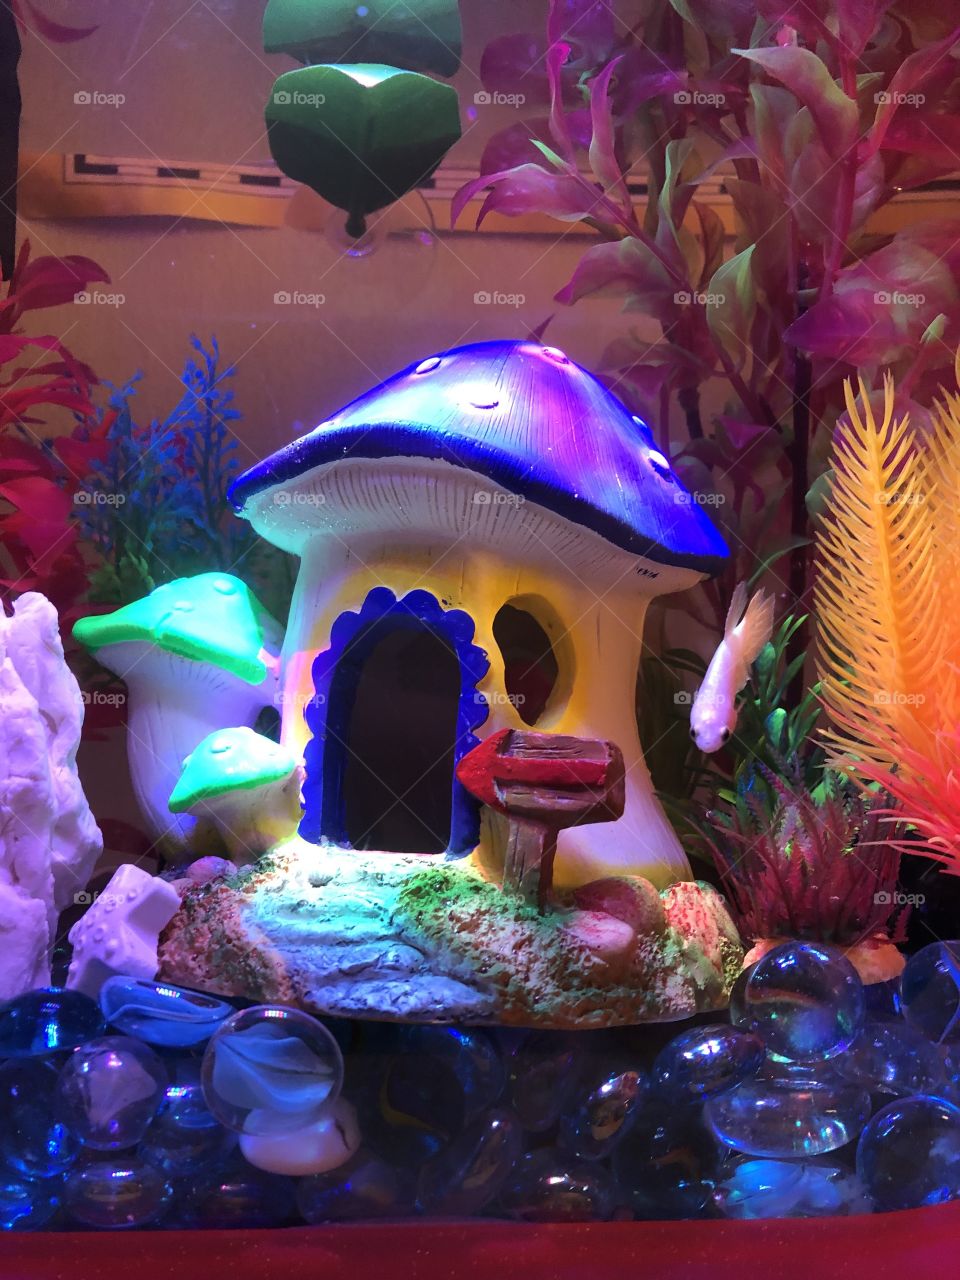 A betta fish explores her new and magical home, supplied by PetSmart